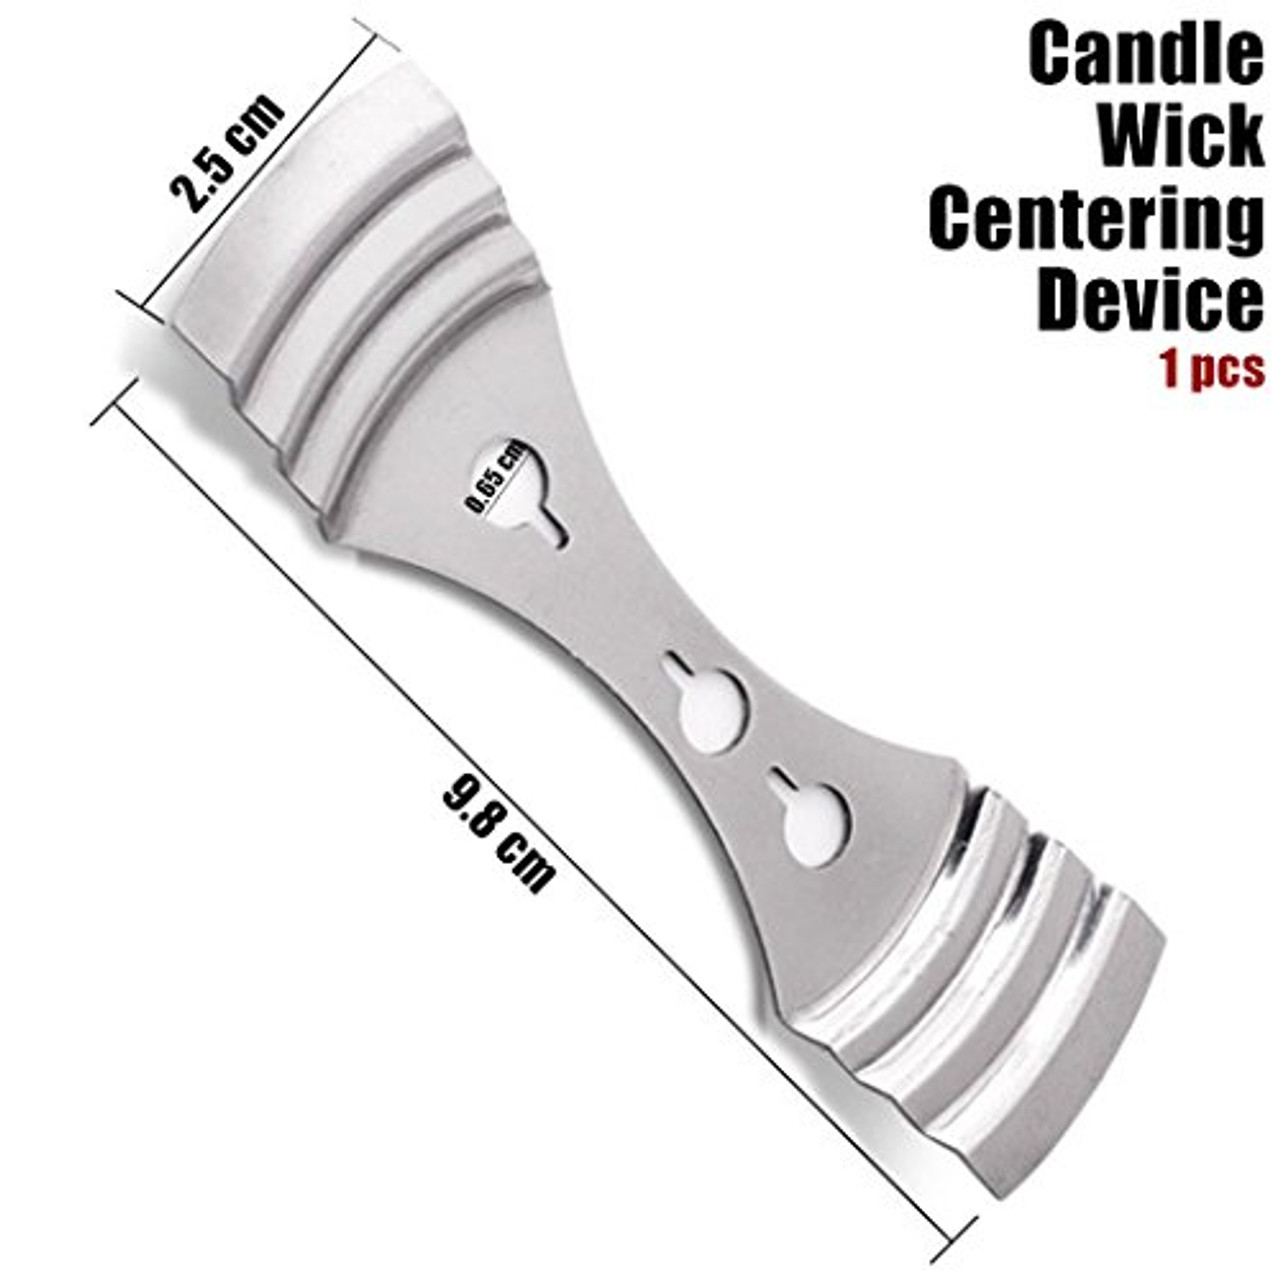 1Pcs Metal Candle Wick Centering Devices Silver Stainless Steel Candle Wick  Holder for DIY Handmade Candle Making Accessories